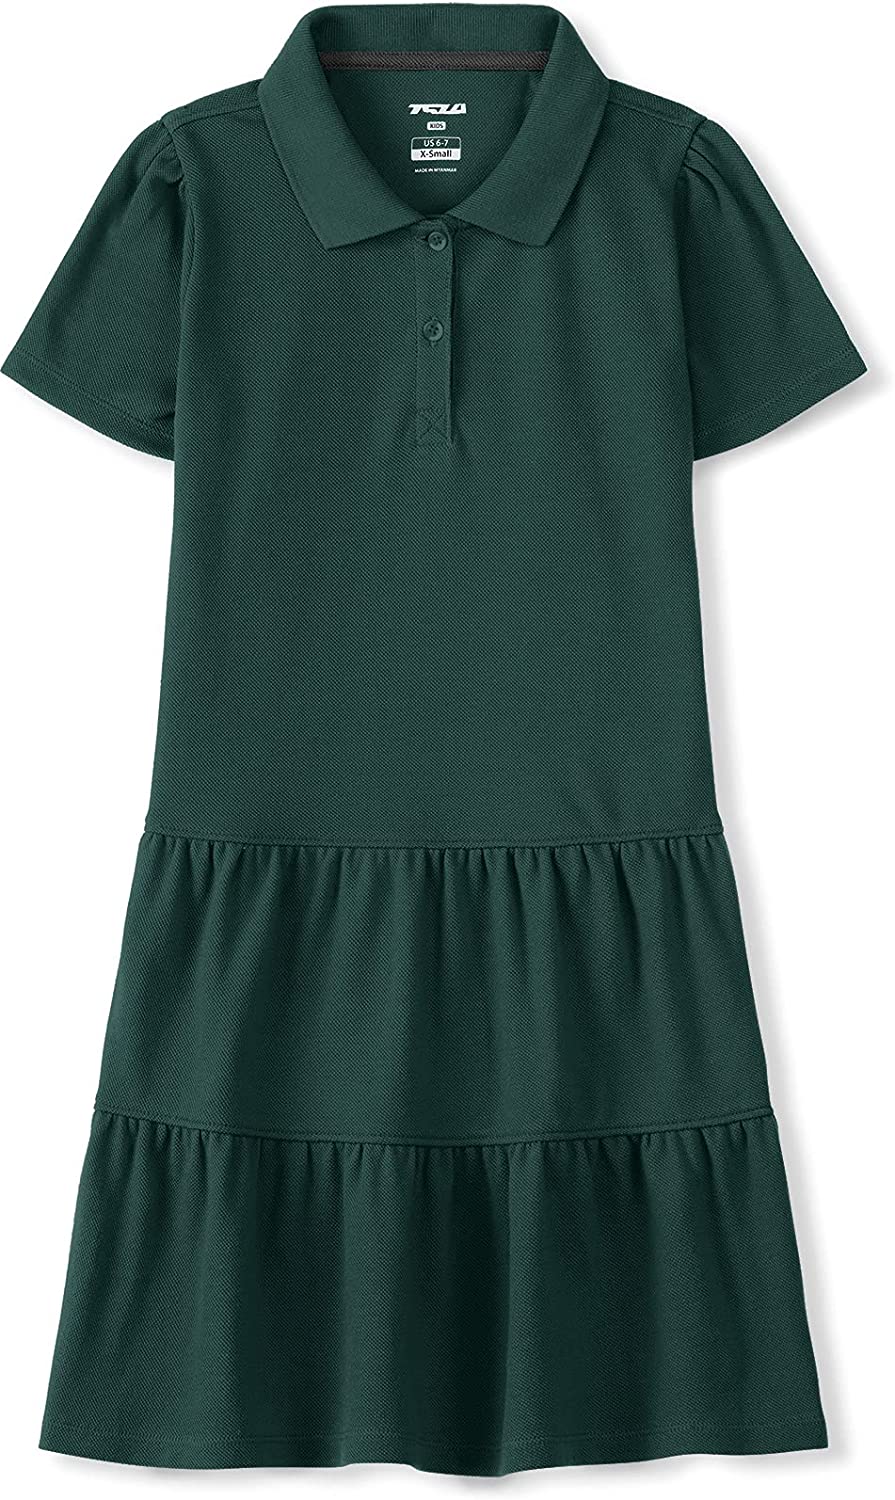  EXARUS Girls Tennis Short Sleeve Polo Dress with